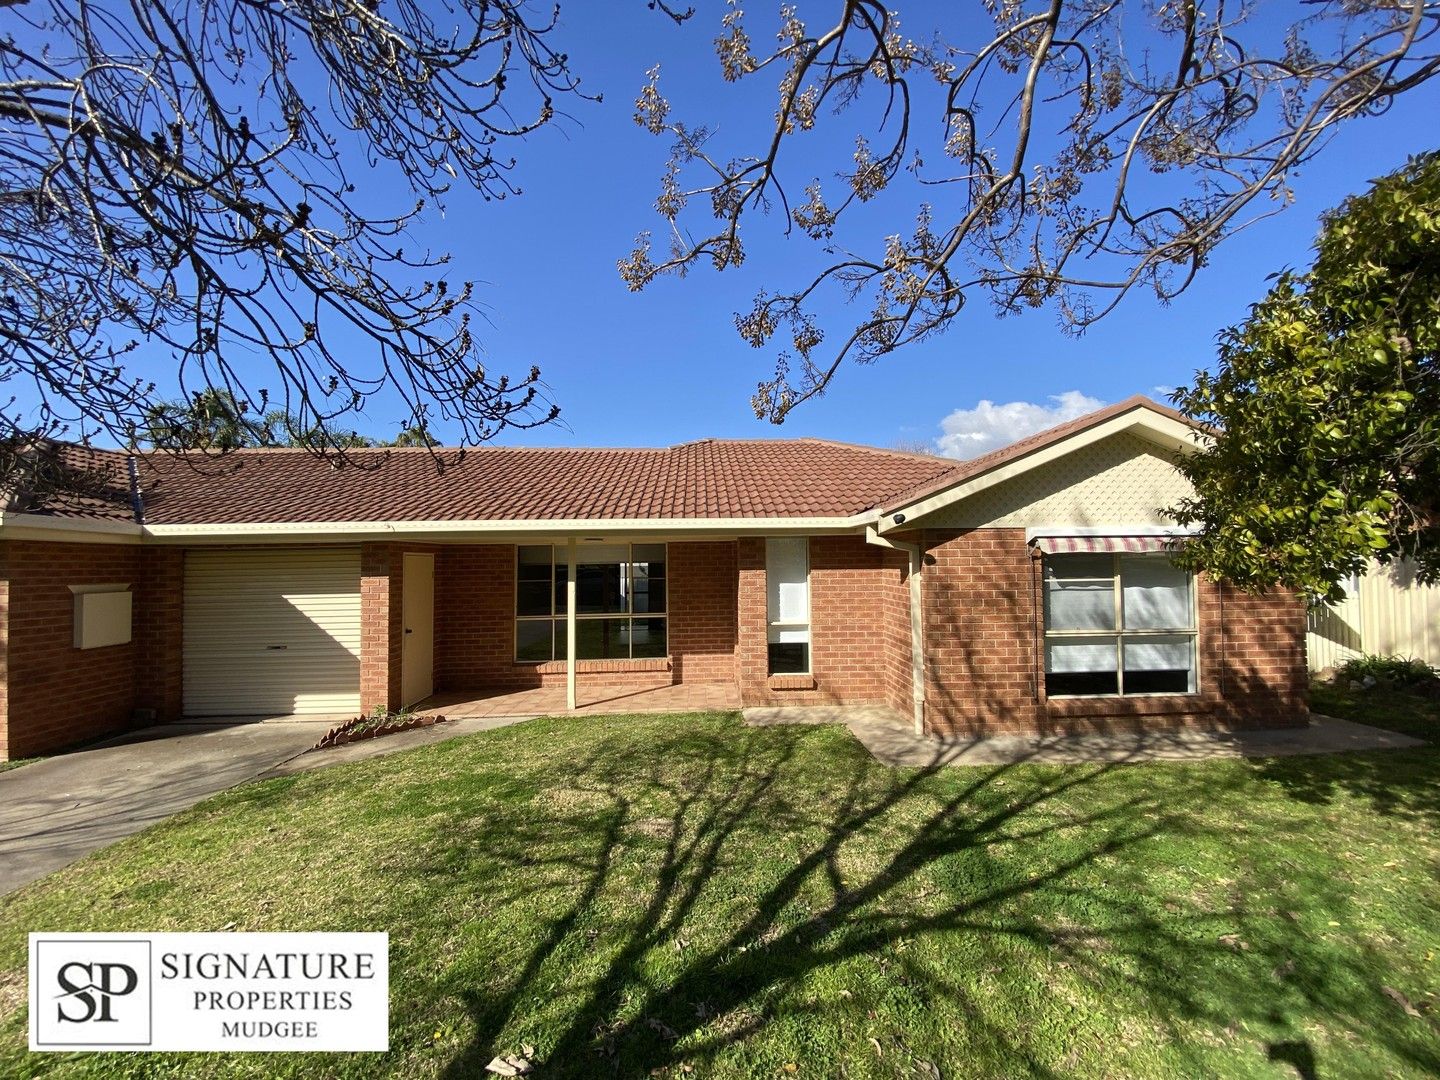 2 bedrooms House in 2/15 Oporto Road MUDGEE NSW, 2850